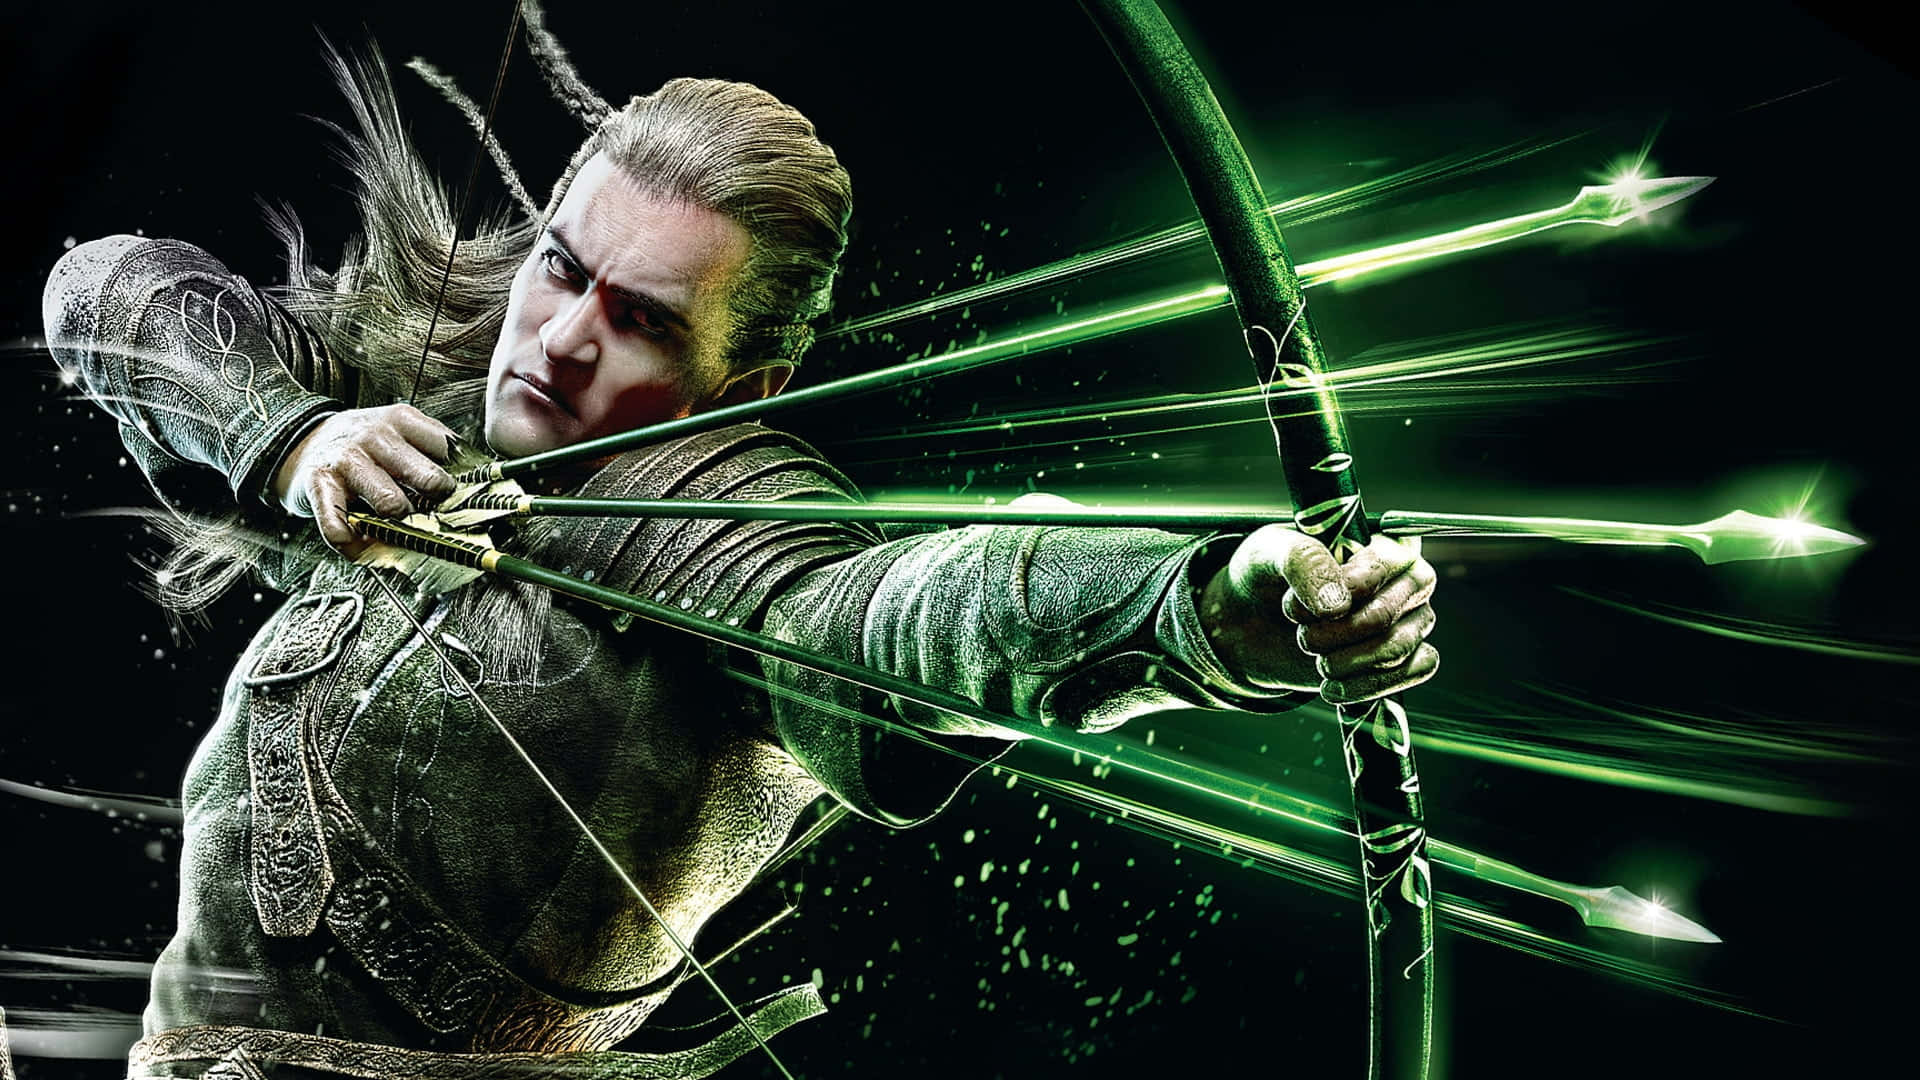 The Hobbit Is Aiming His Bow And Arrow Wallpaper